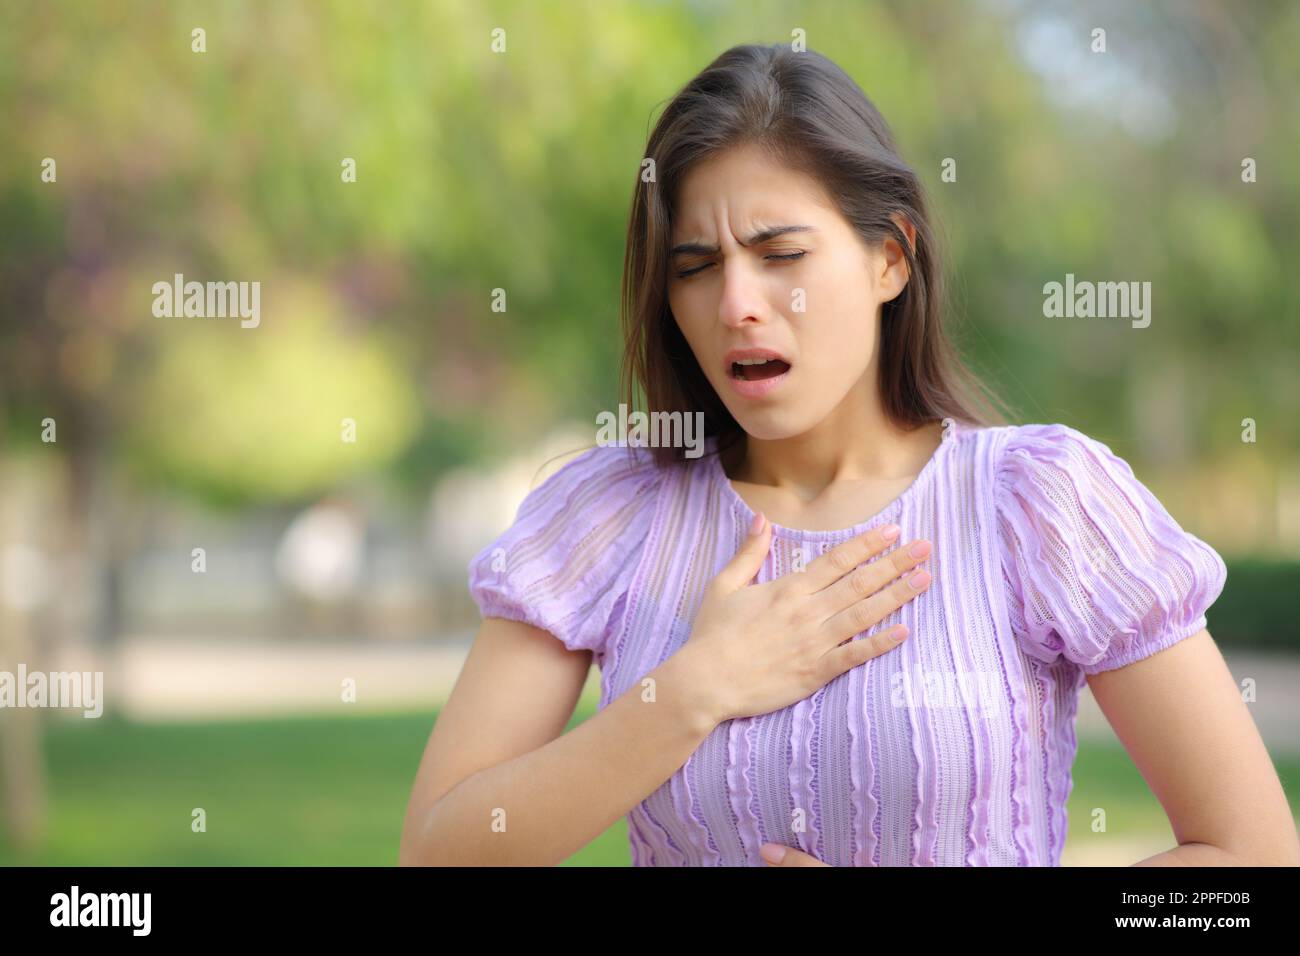 Stressed woman suffering asthma attack in a park Stock Photo